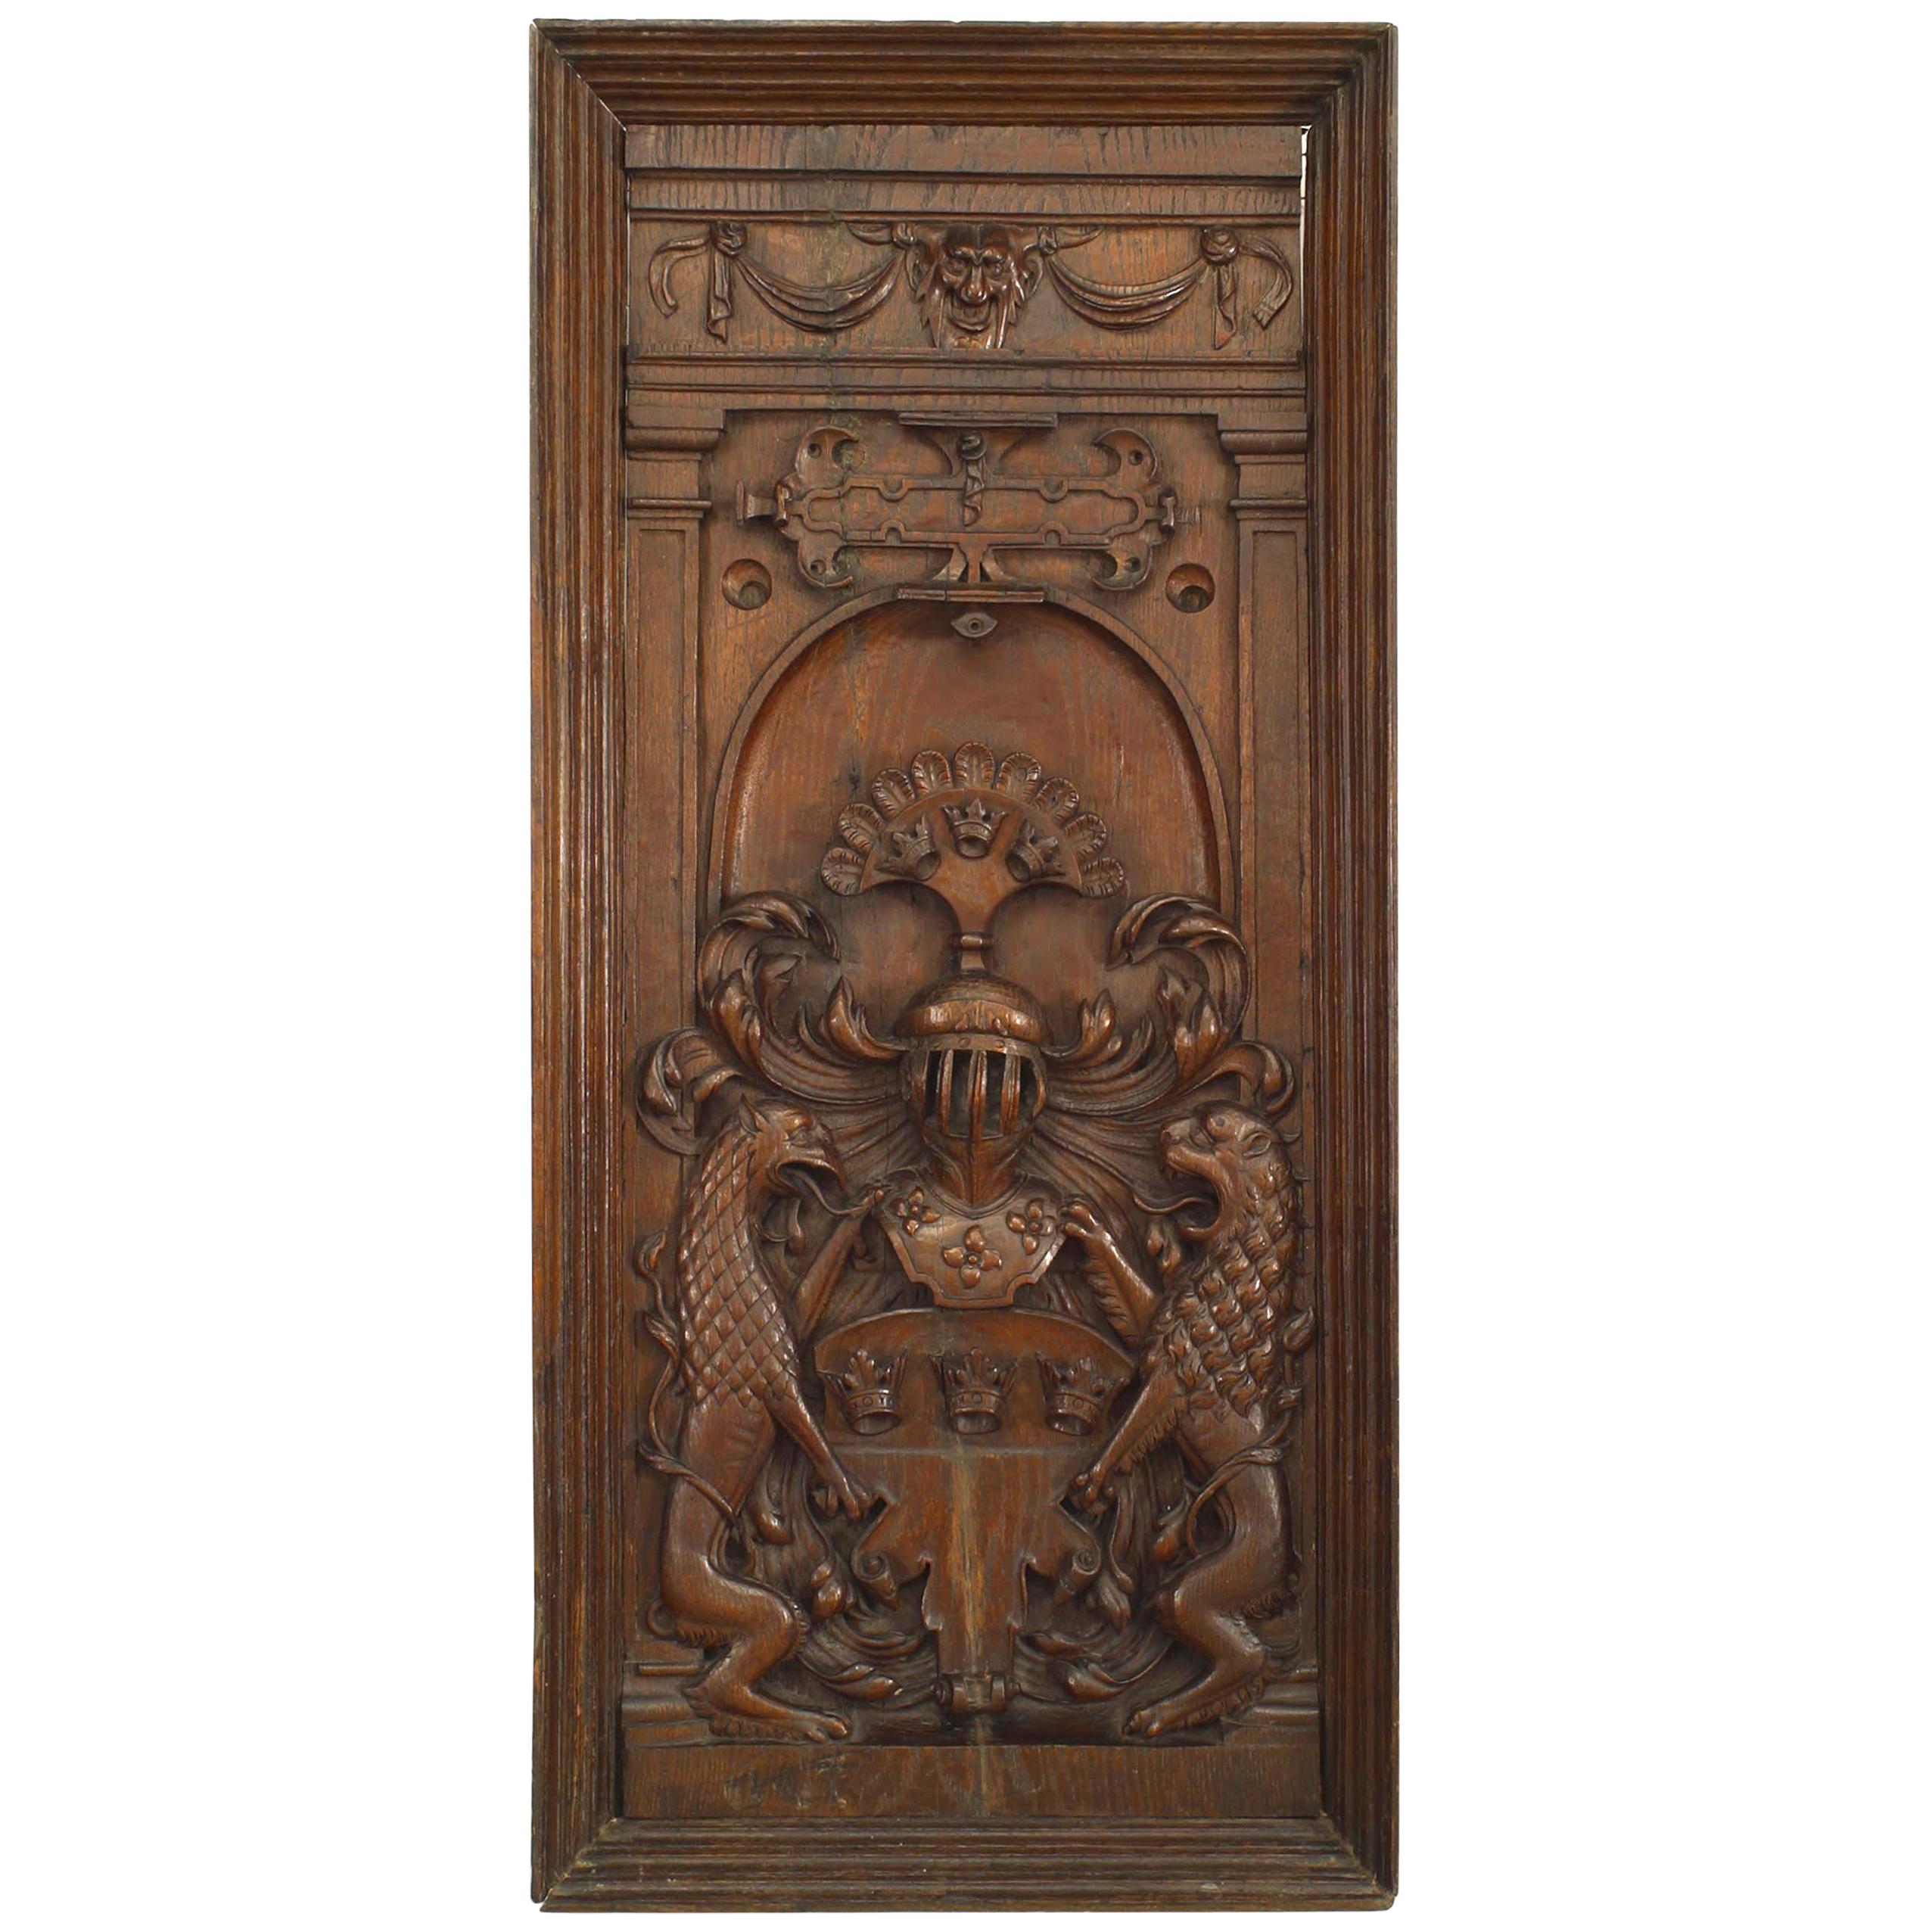 Italian Renaissance Style Coat of Arms Wall Carvings